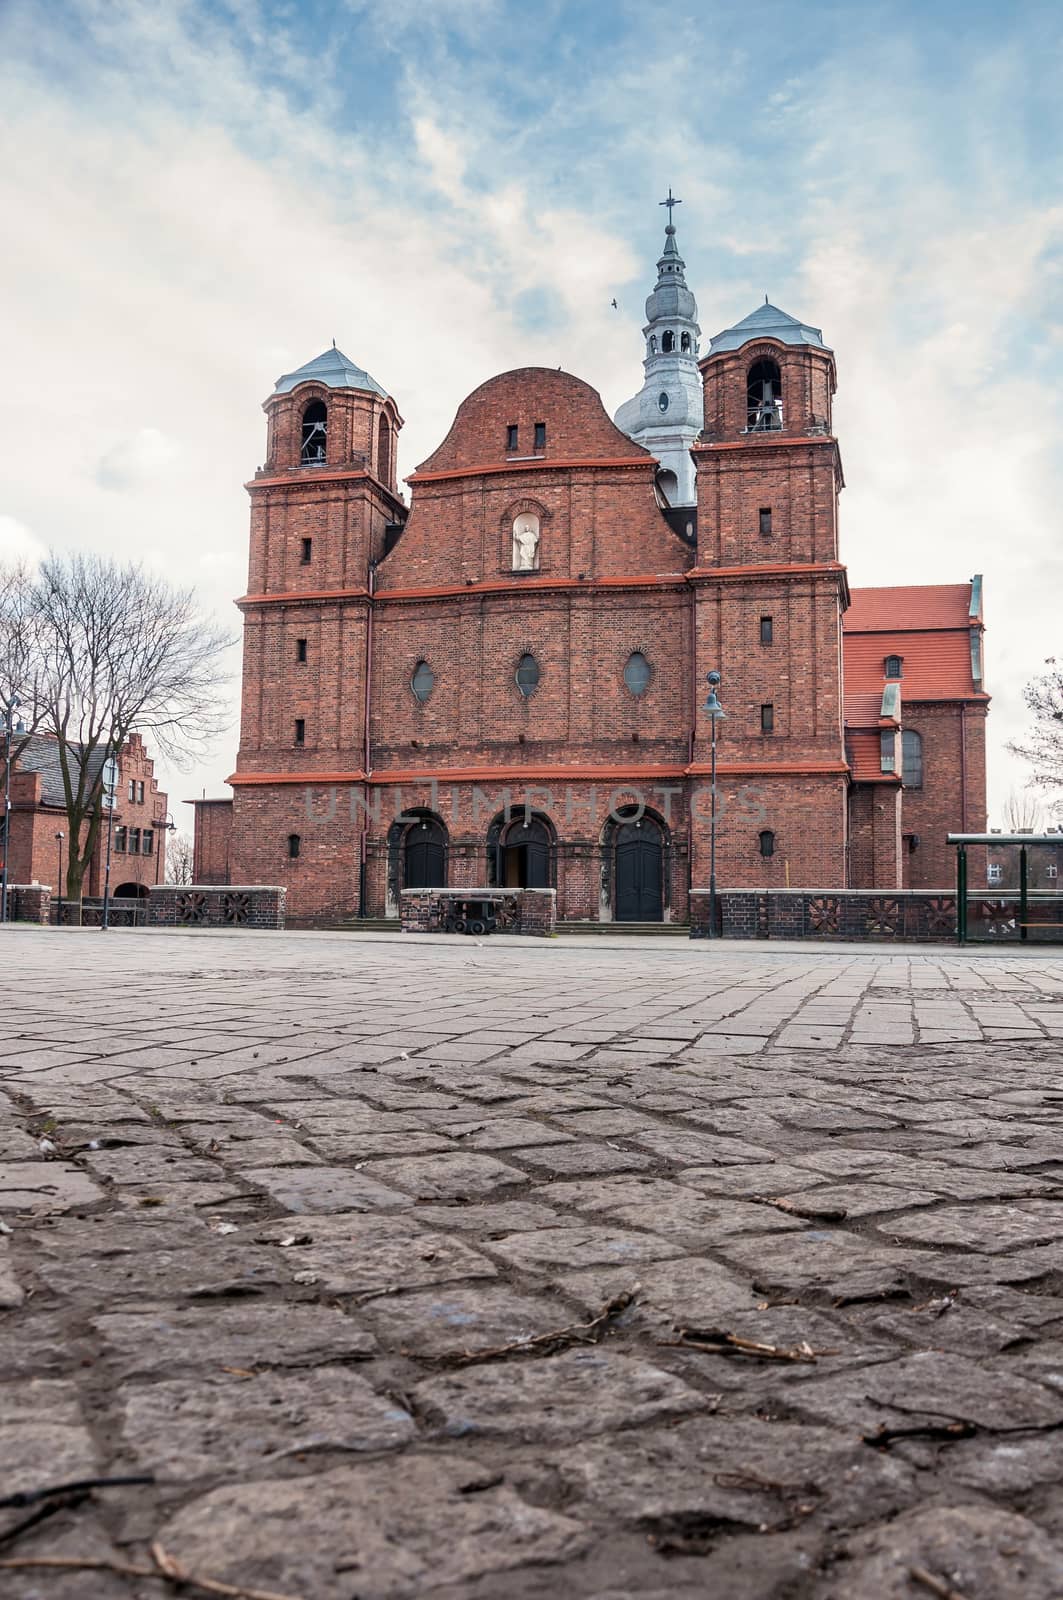 Church of St. Anne in Nikiszowiec district, Katowice, Poland by mkos83